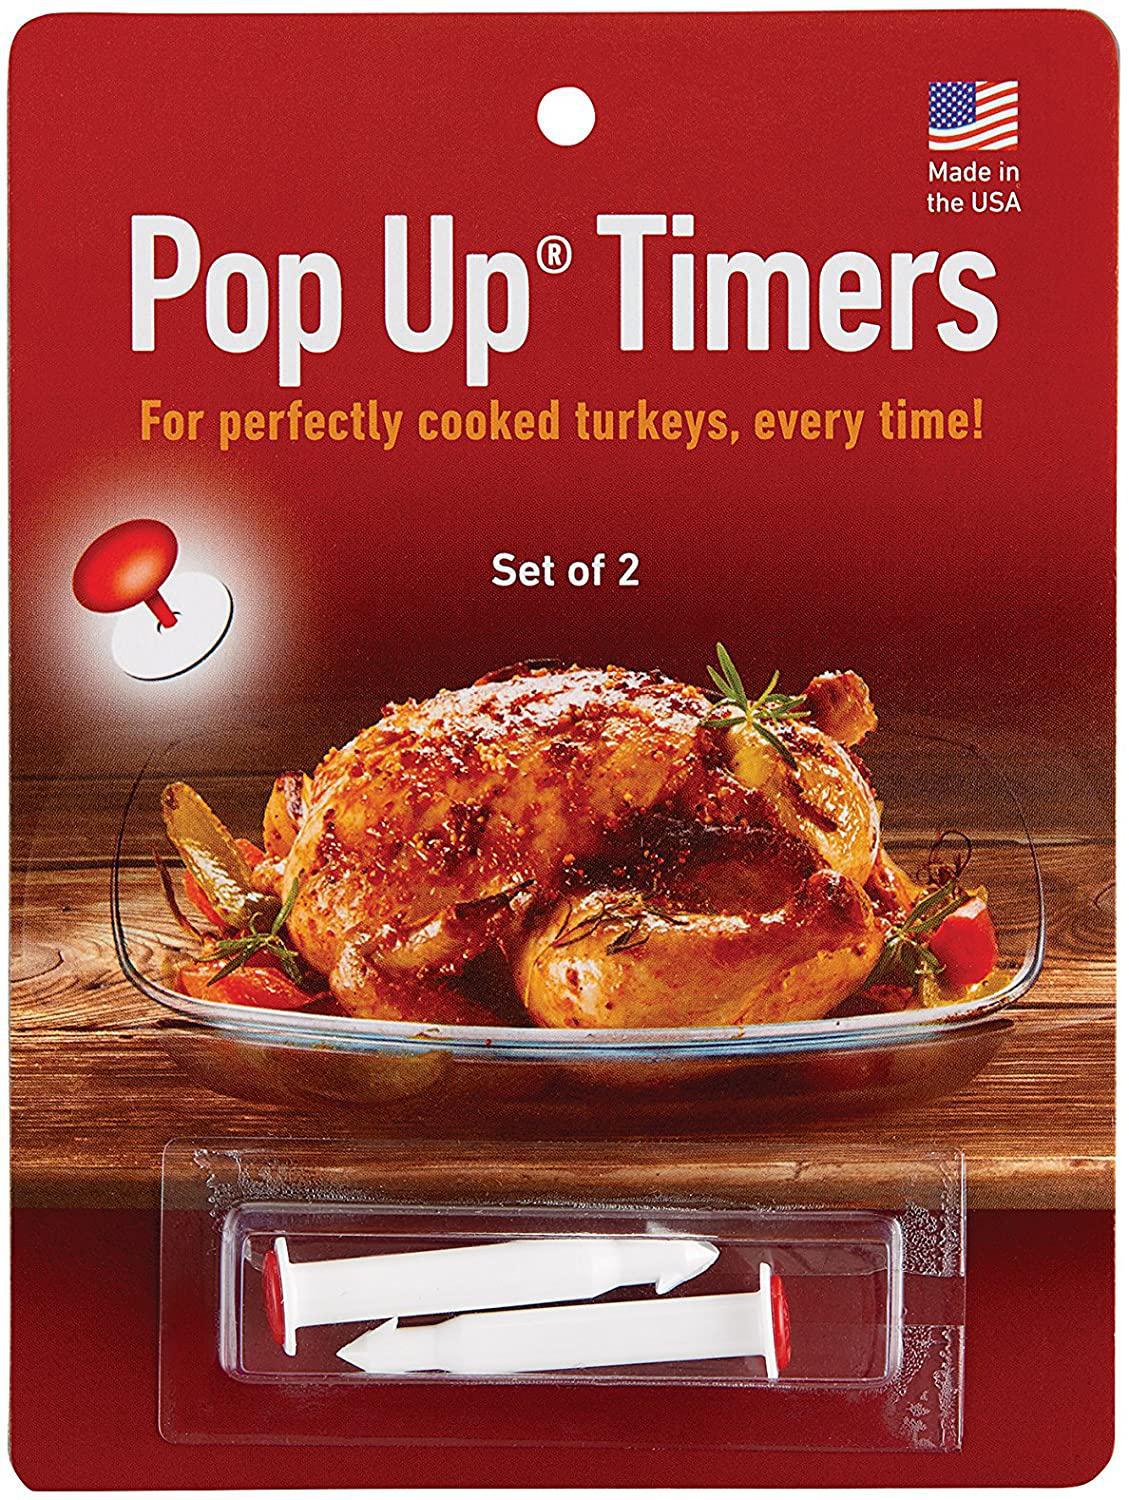 Pop-up turkey thermometers not always accurate - ABC13 Houston